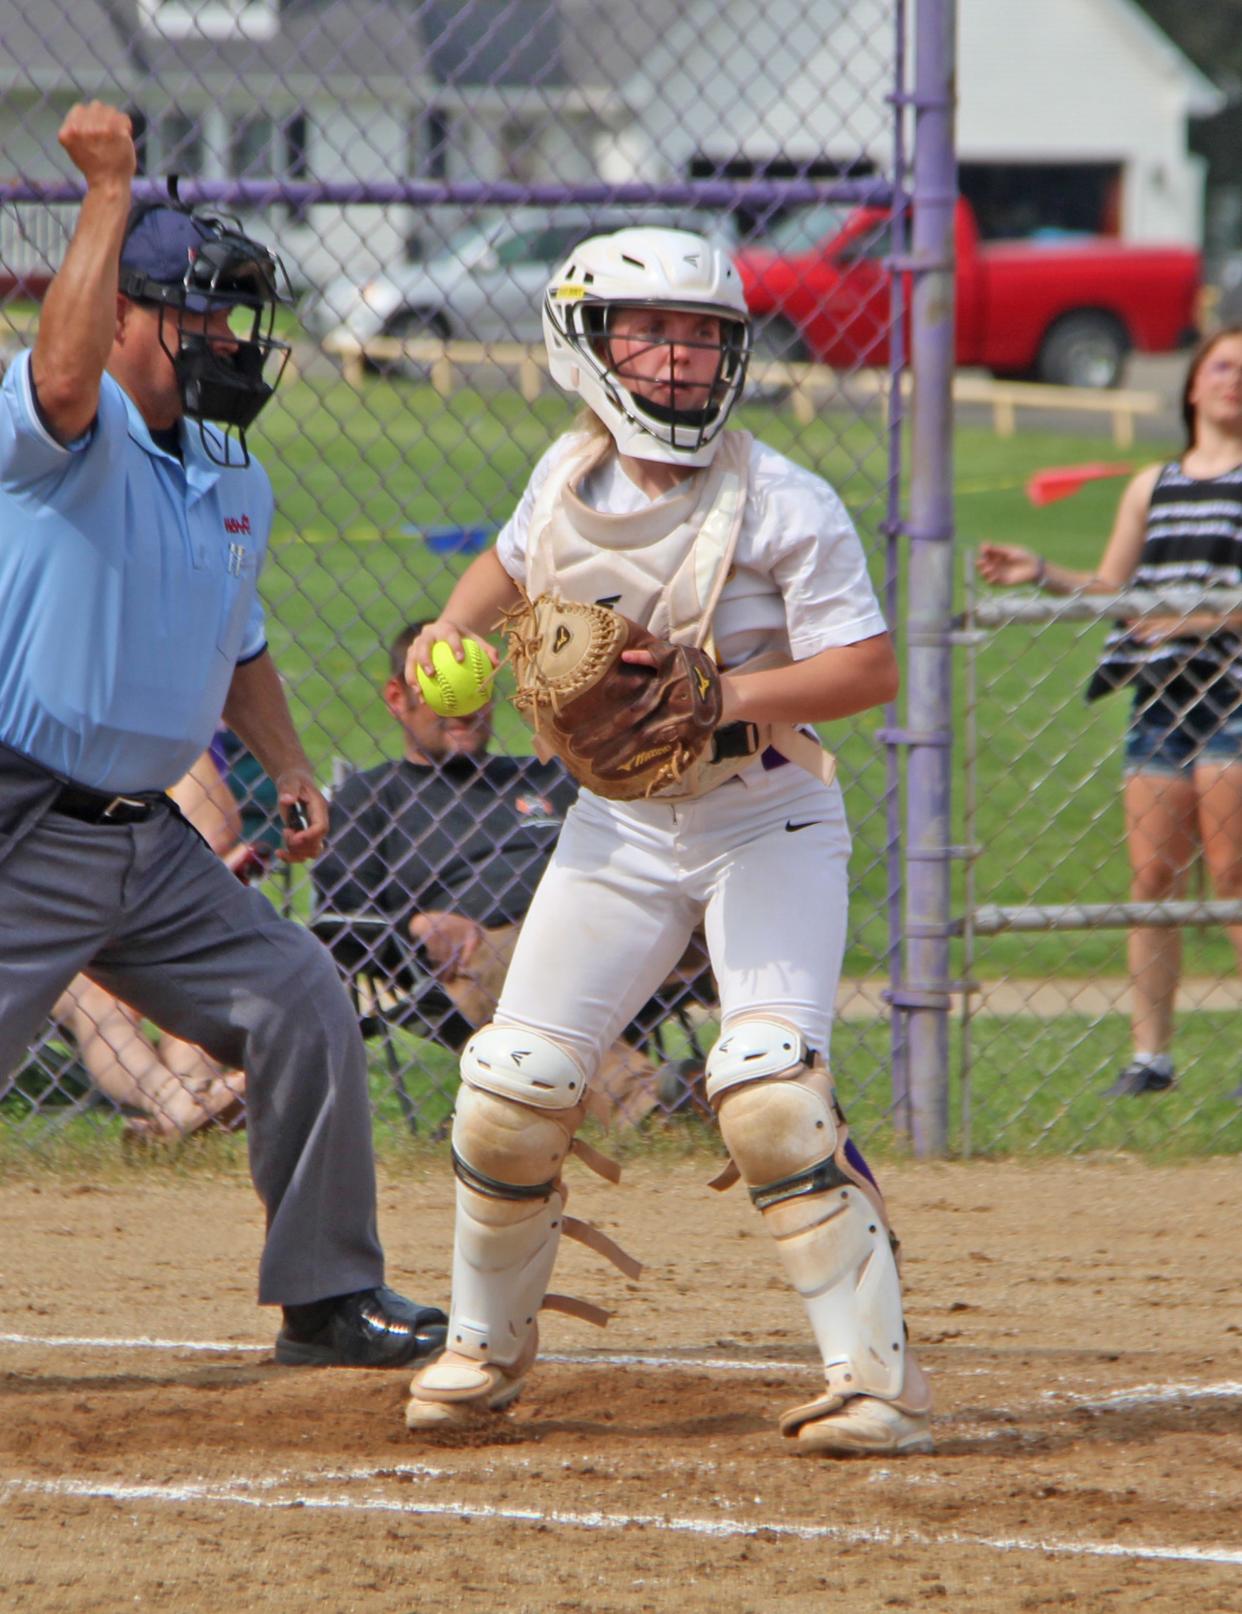 Bronson's Jadyn Cary earned her second straight MHSSCA D3 All State First Team honor this season as the catcher for the Big 8 champion Vikings